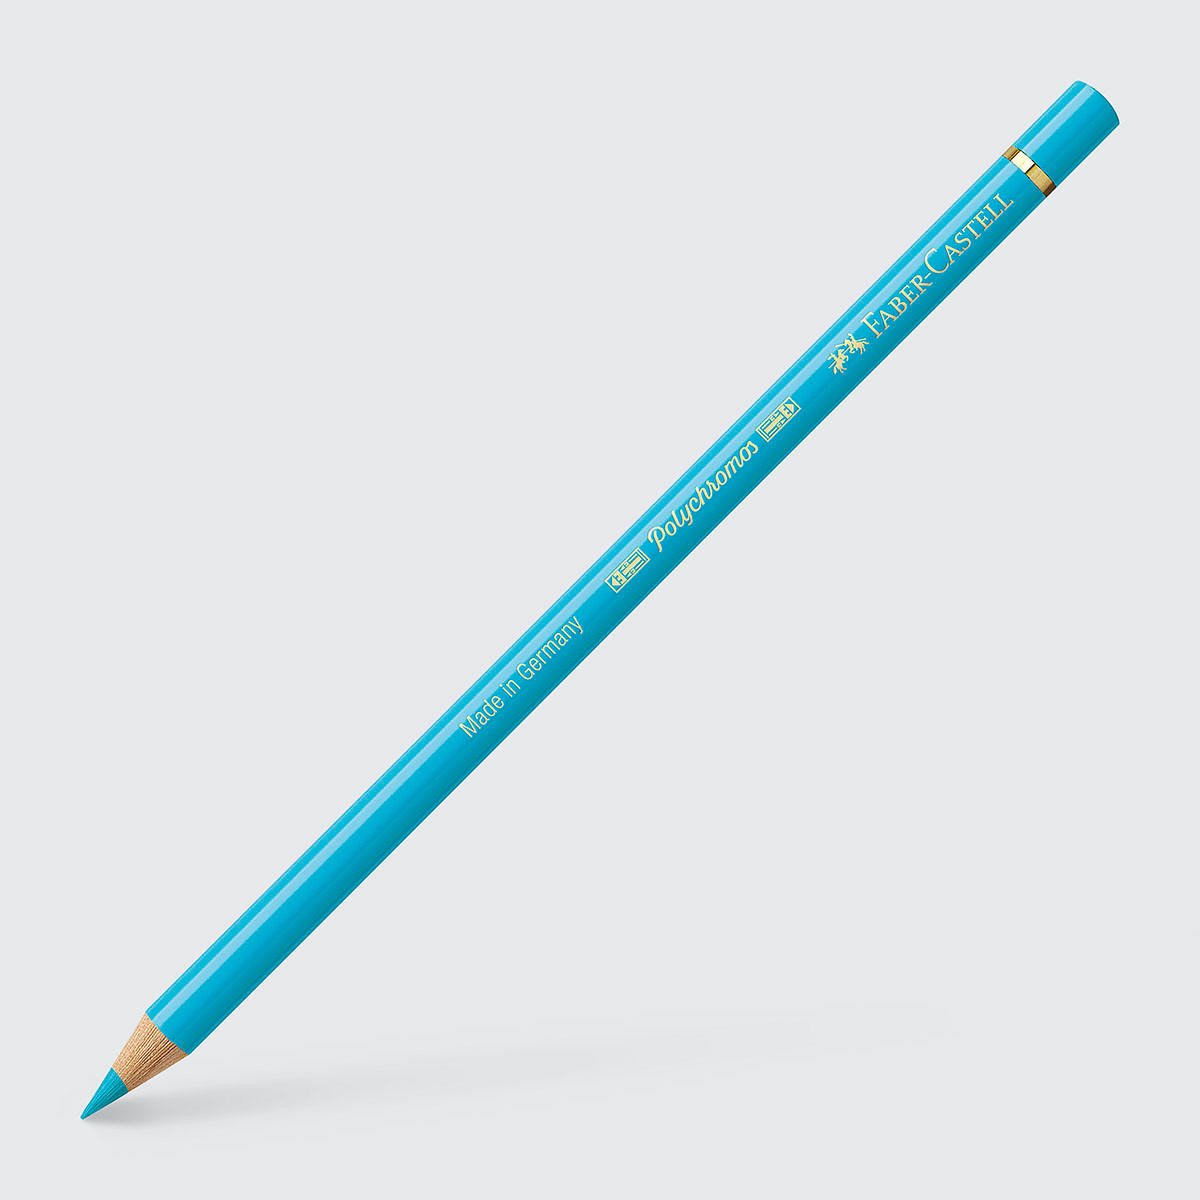 Faber-Castell Polychromos Artists’ Coloured Pencil One Size Light Cobalt Turquoise (154)